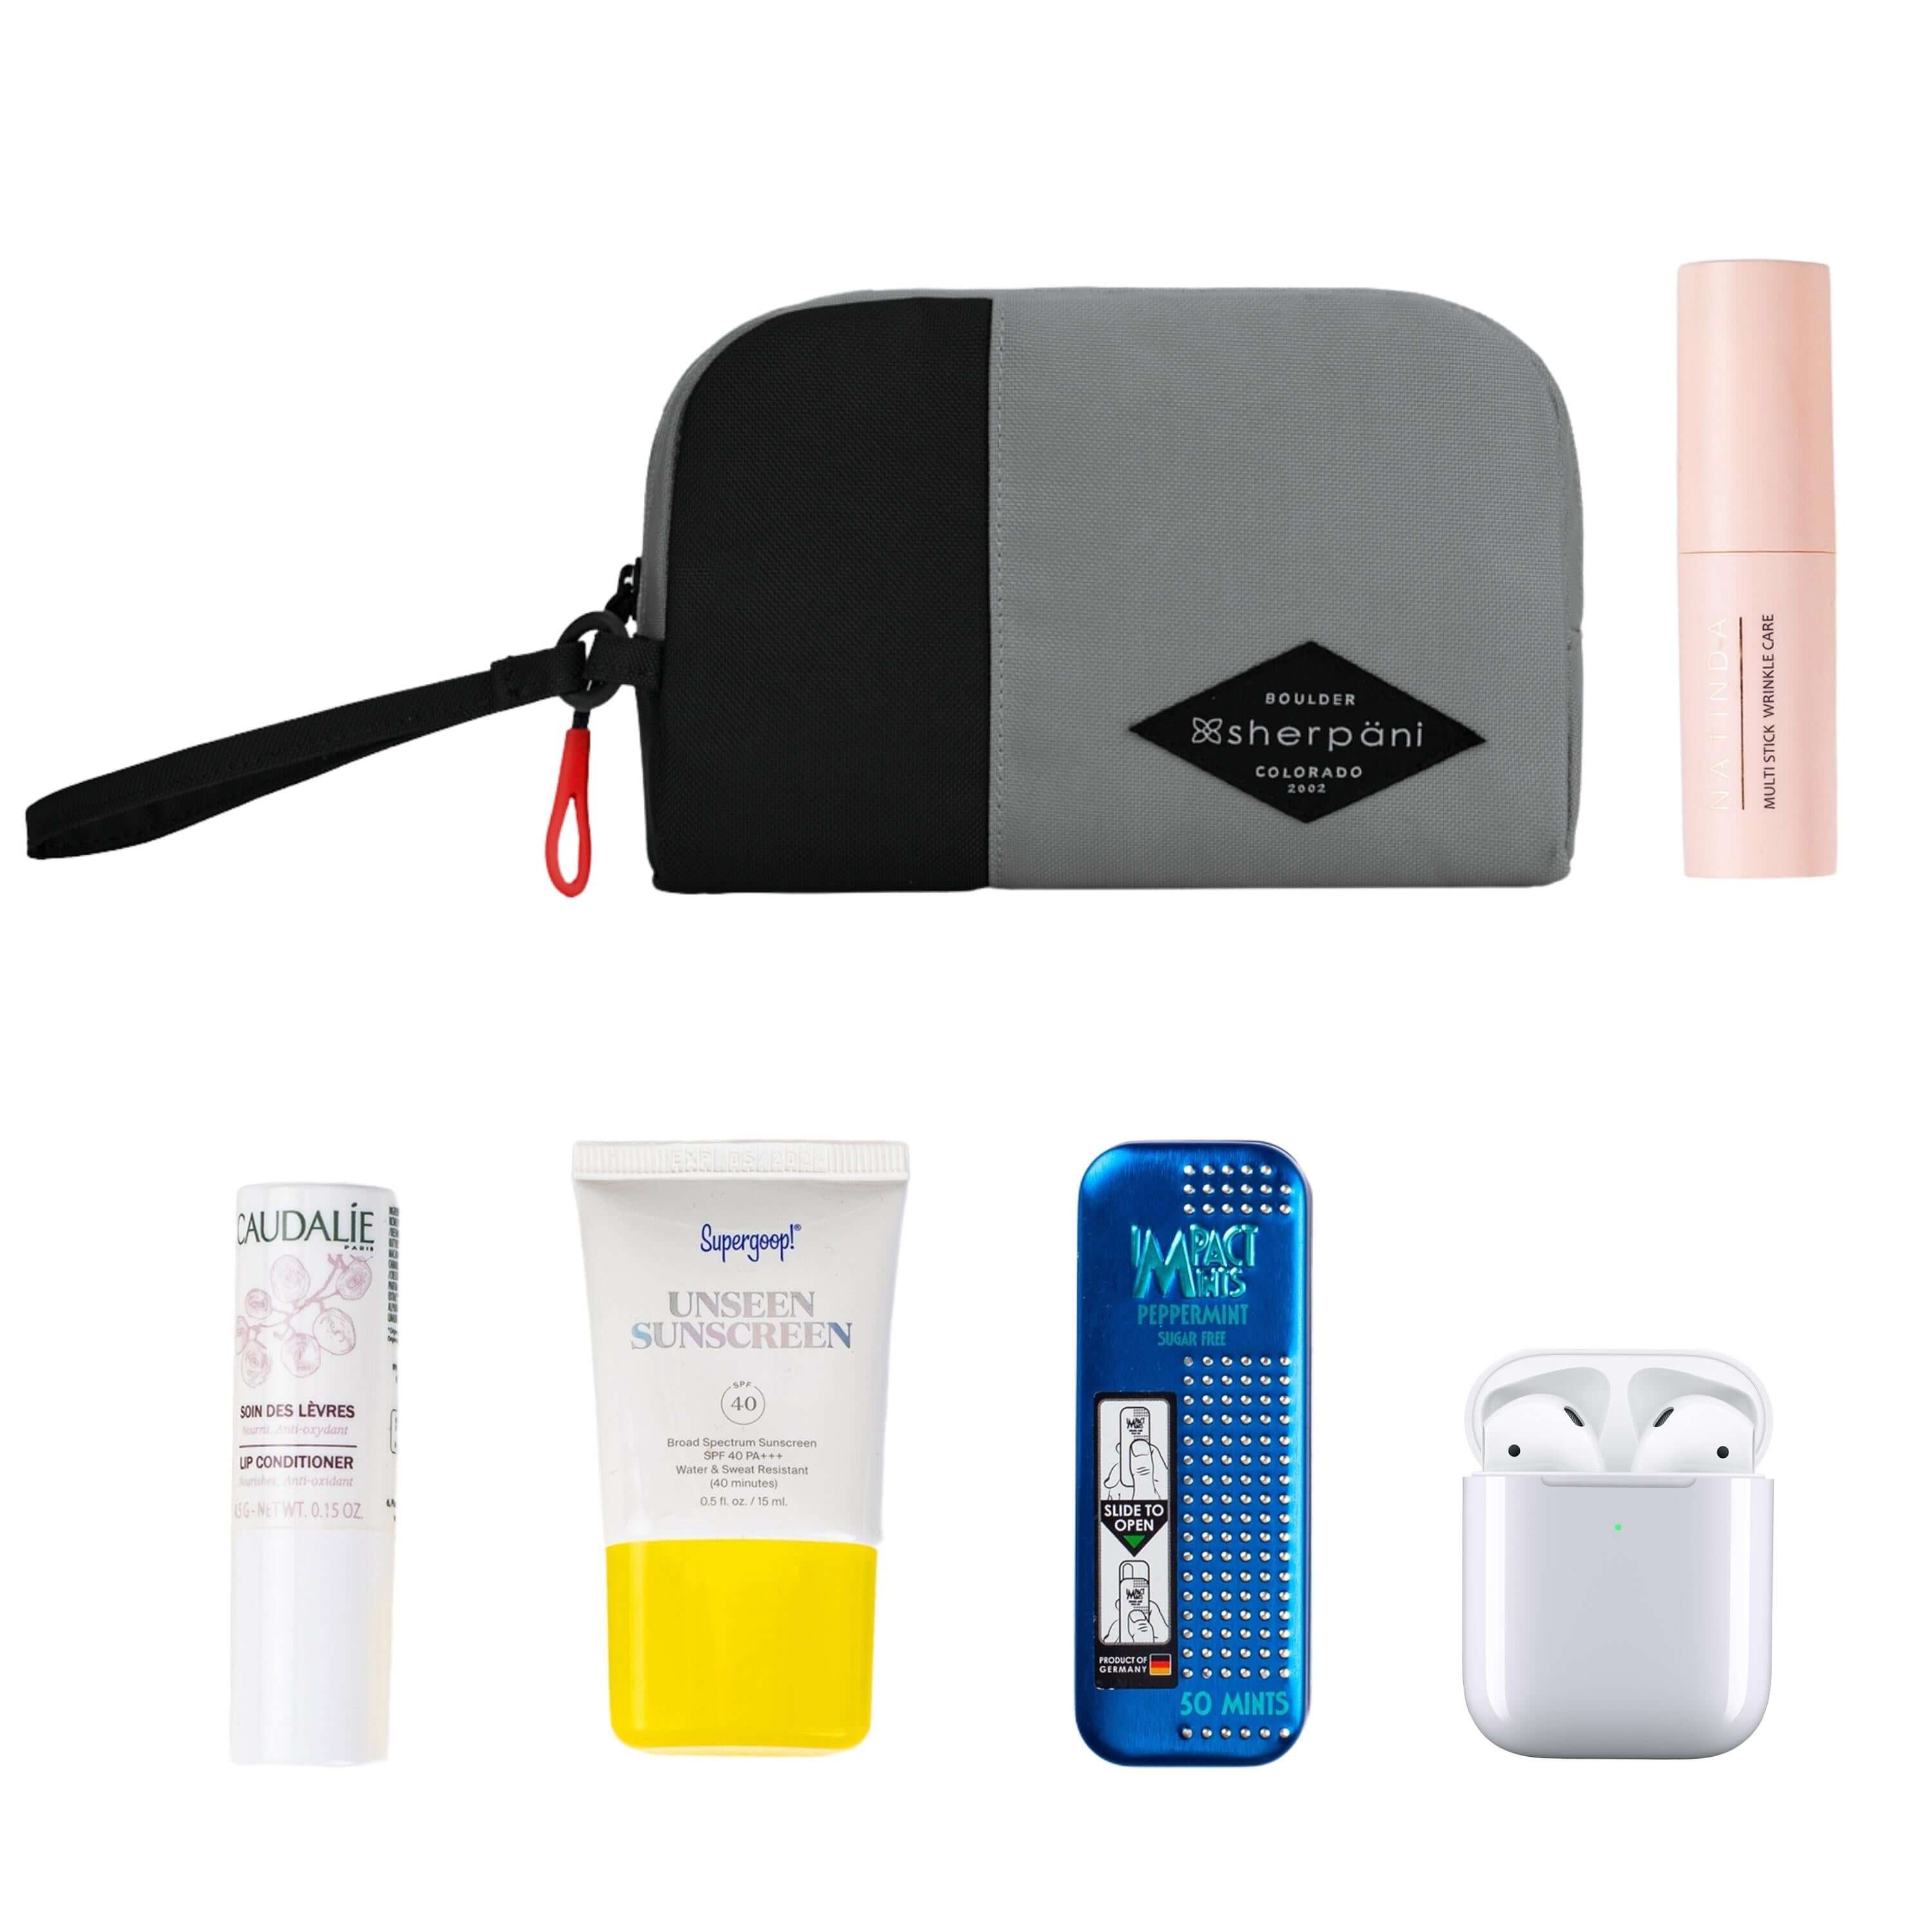 Top view of example items to fill the bag. Sherpani travel accessory, the Jolie in Stone in small size, lies in the upper left corner. It is surrounded by an assortment of items: beauty product, skincare product, sunscreen, mints and AirPods.